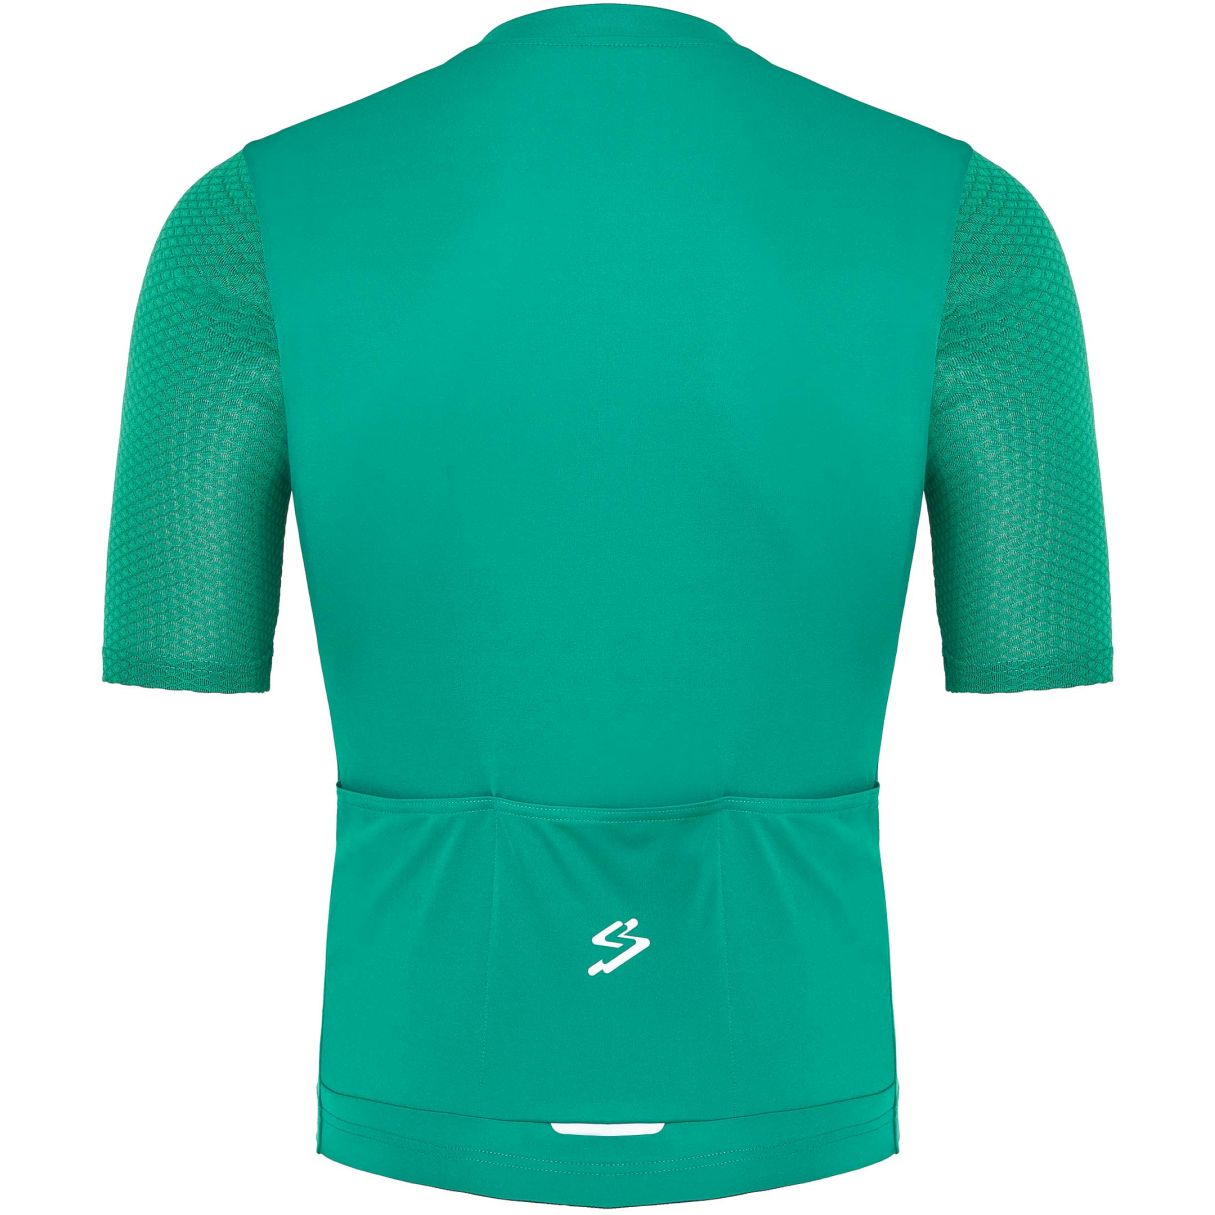 Spiuk Maillot M/l Anatomic Hombre rojo maillots ciclismo